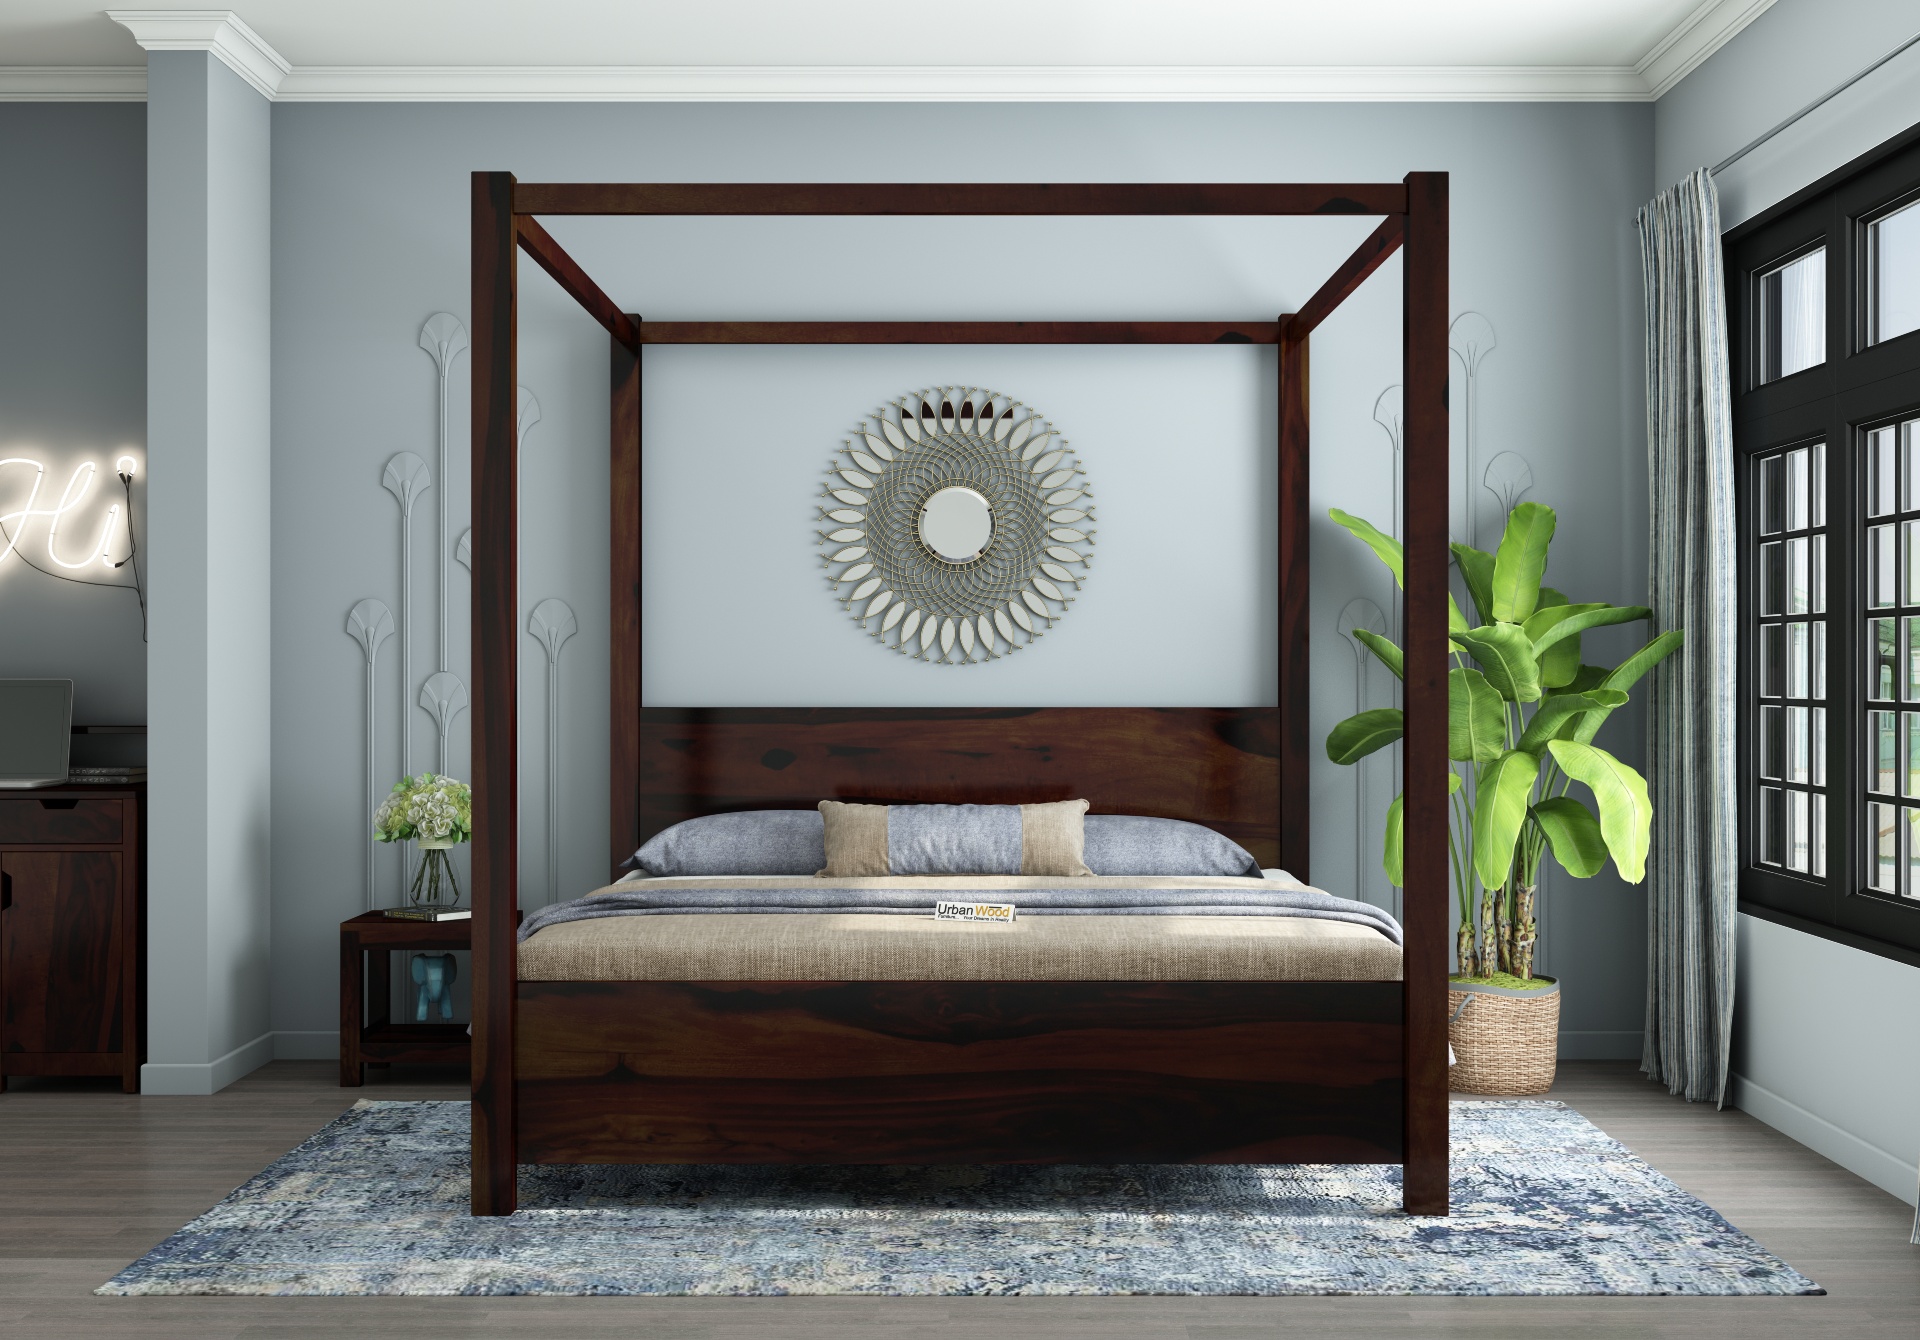 Sigma Poster Bed (King Size, Walnut Finish)